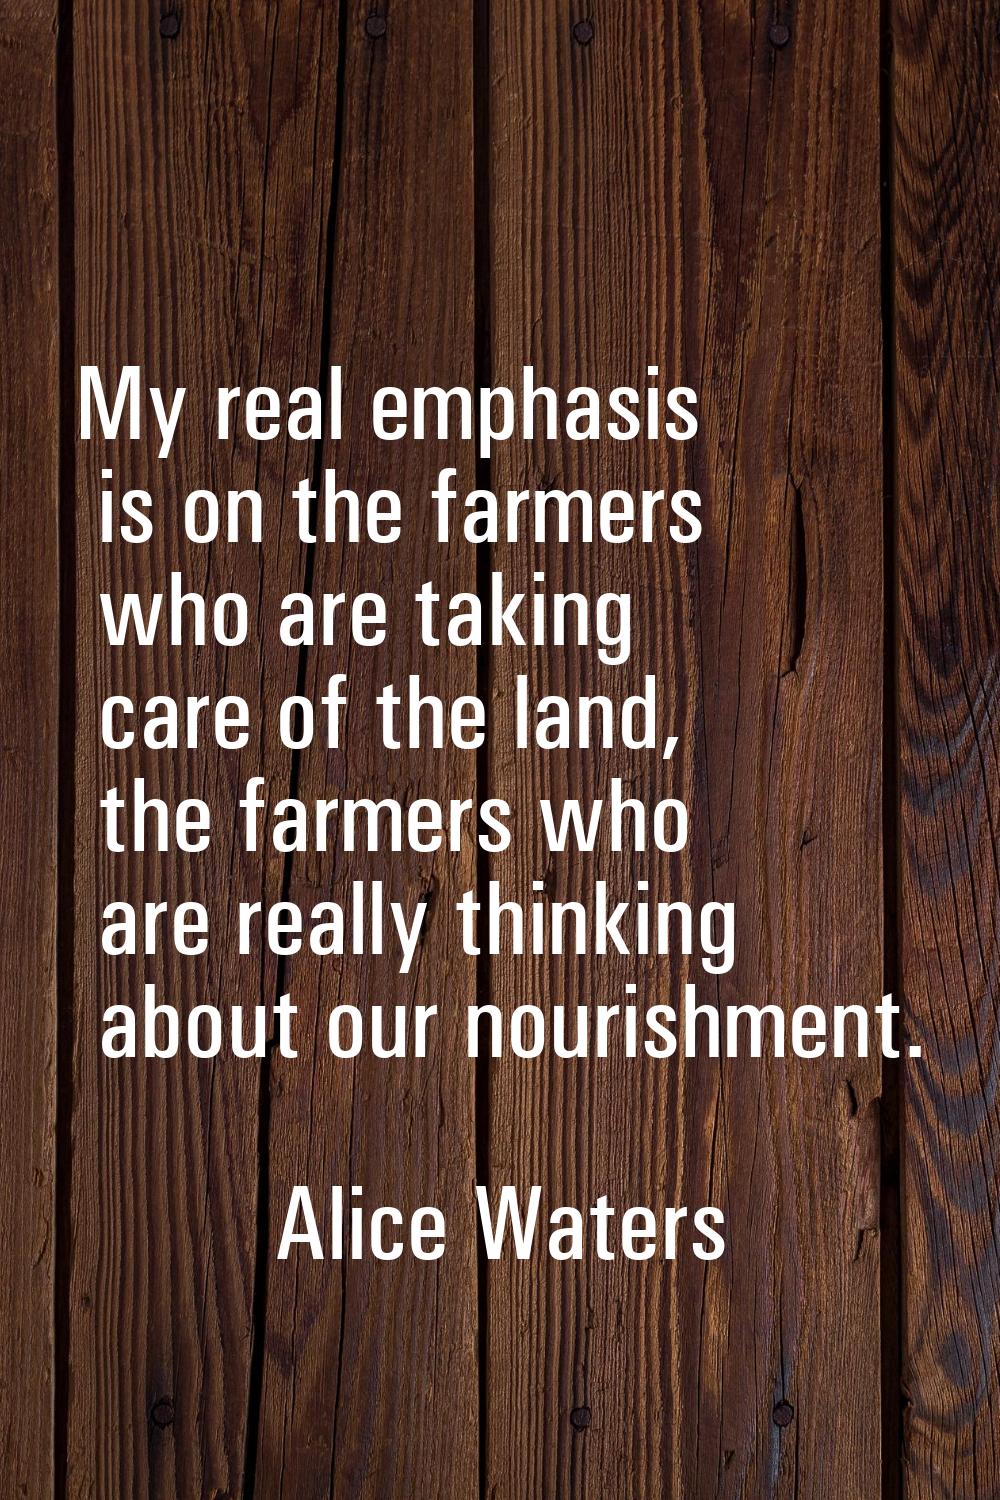 My real emphasis is on the farmers who are taking care of the land, the farmers who are really thin